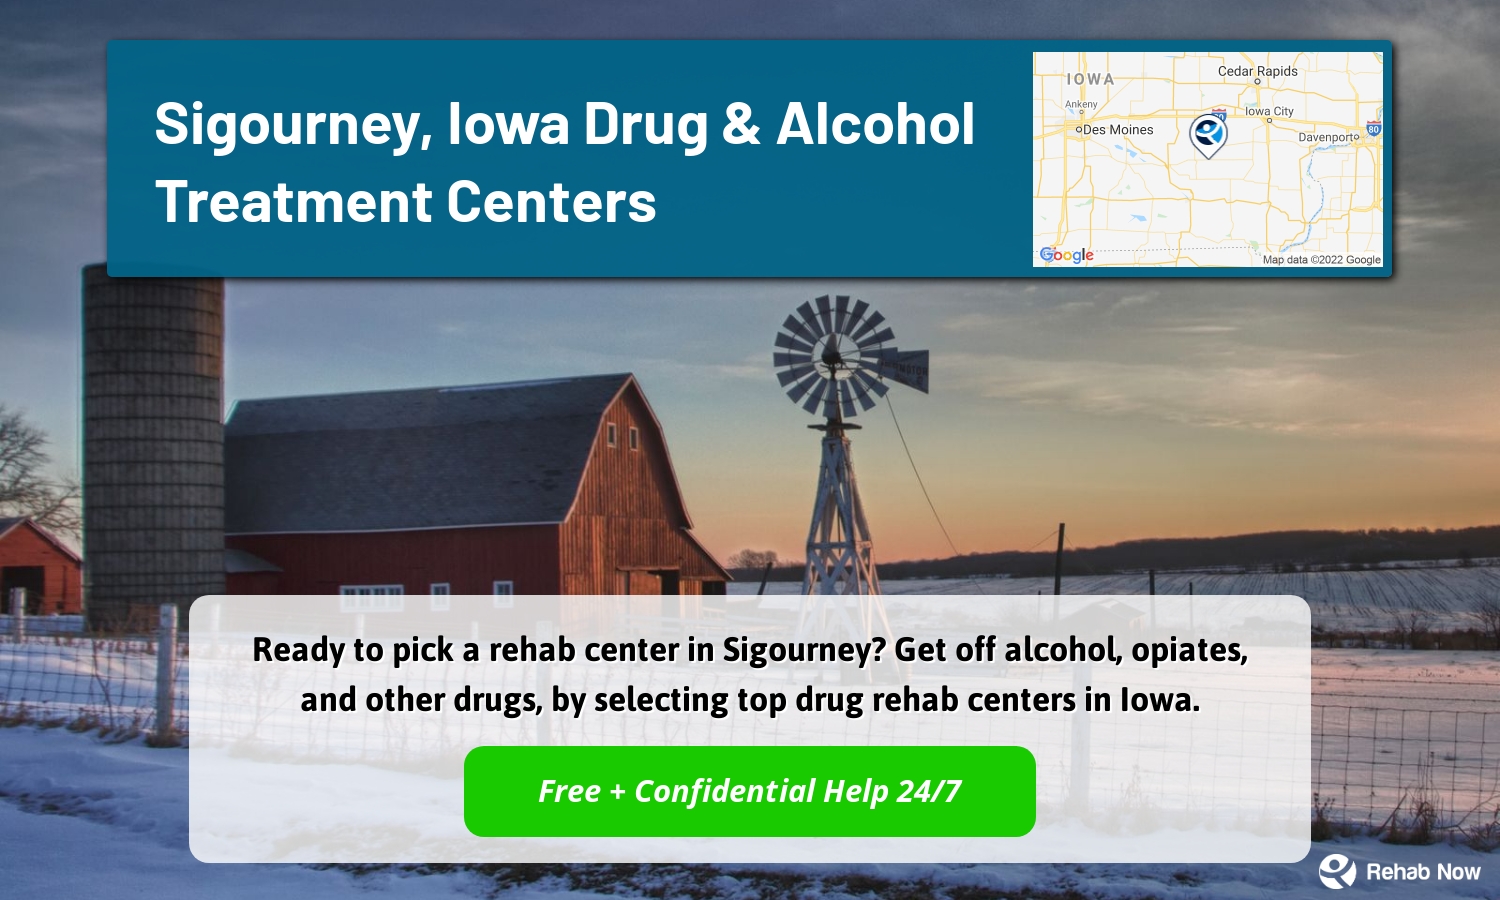 Ready to pick a rehab center in Sigourney? Get off alcohol, opiates, and other drugs, by selecting top drug rehab centers in Iowa.